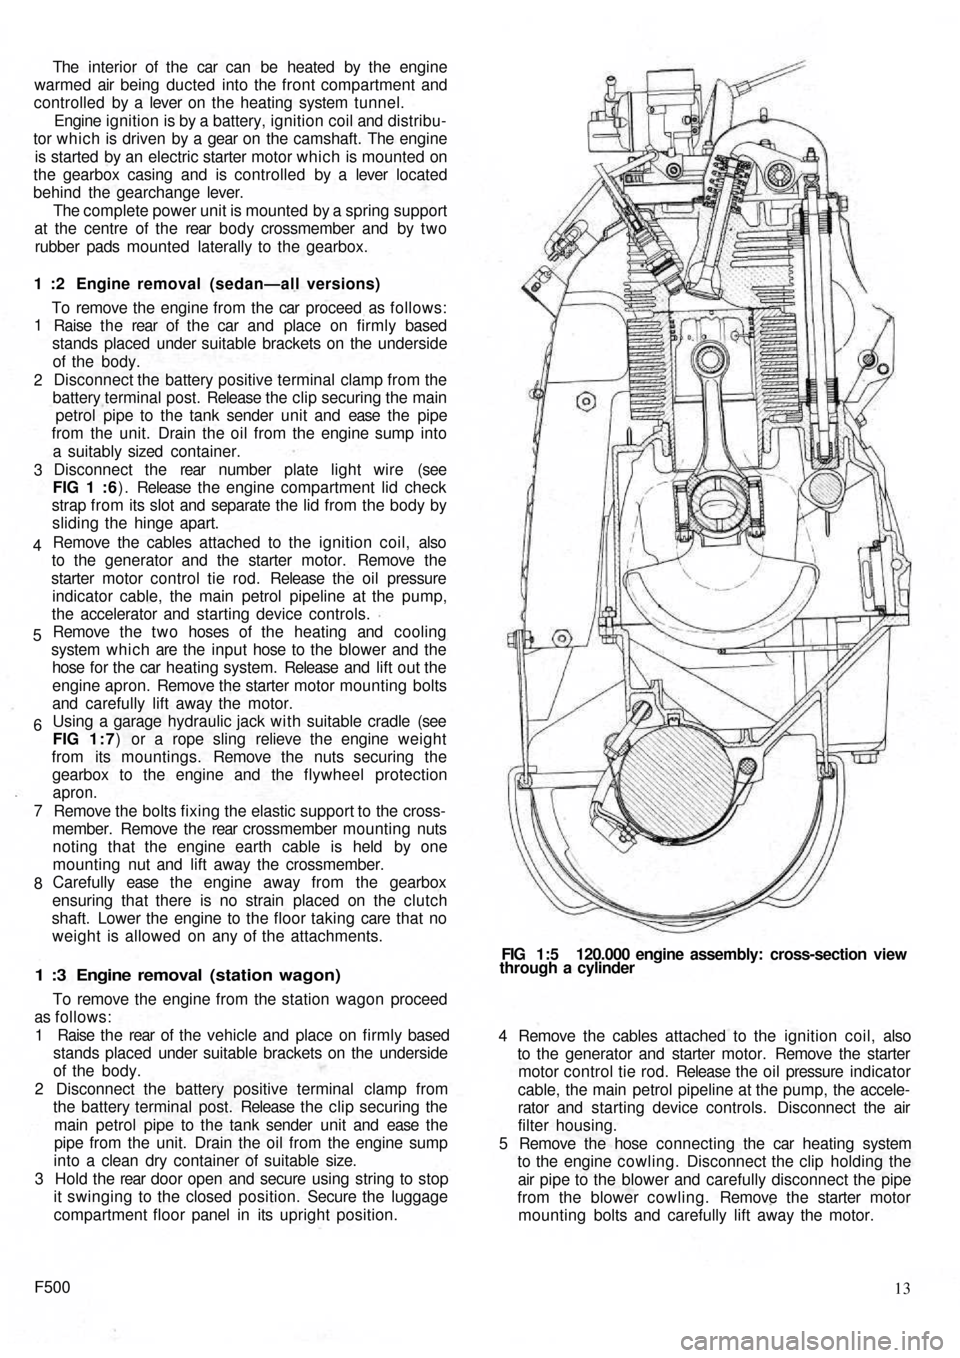 FIAT 500 1969 1.G Workshop Manual The  interior of the  car can  be heated by the engine
warmed air being ducted into the front compartment and
controlled  by a  lever on the heating system tunnel.
Engine ignition is by a battery, ign